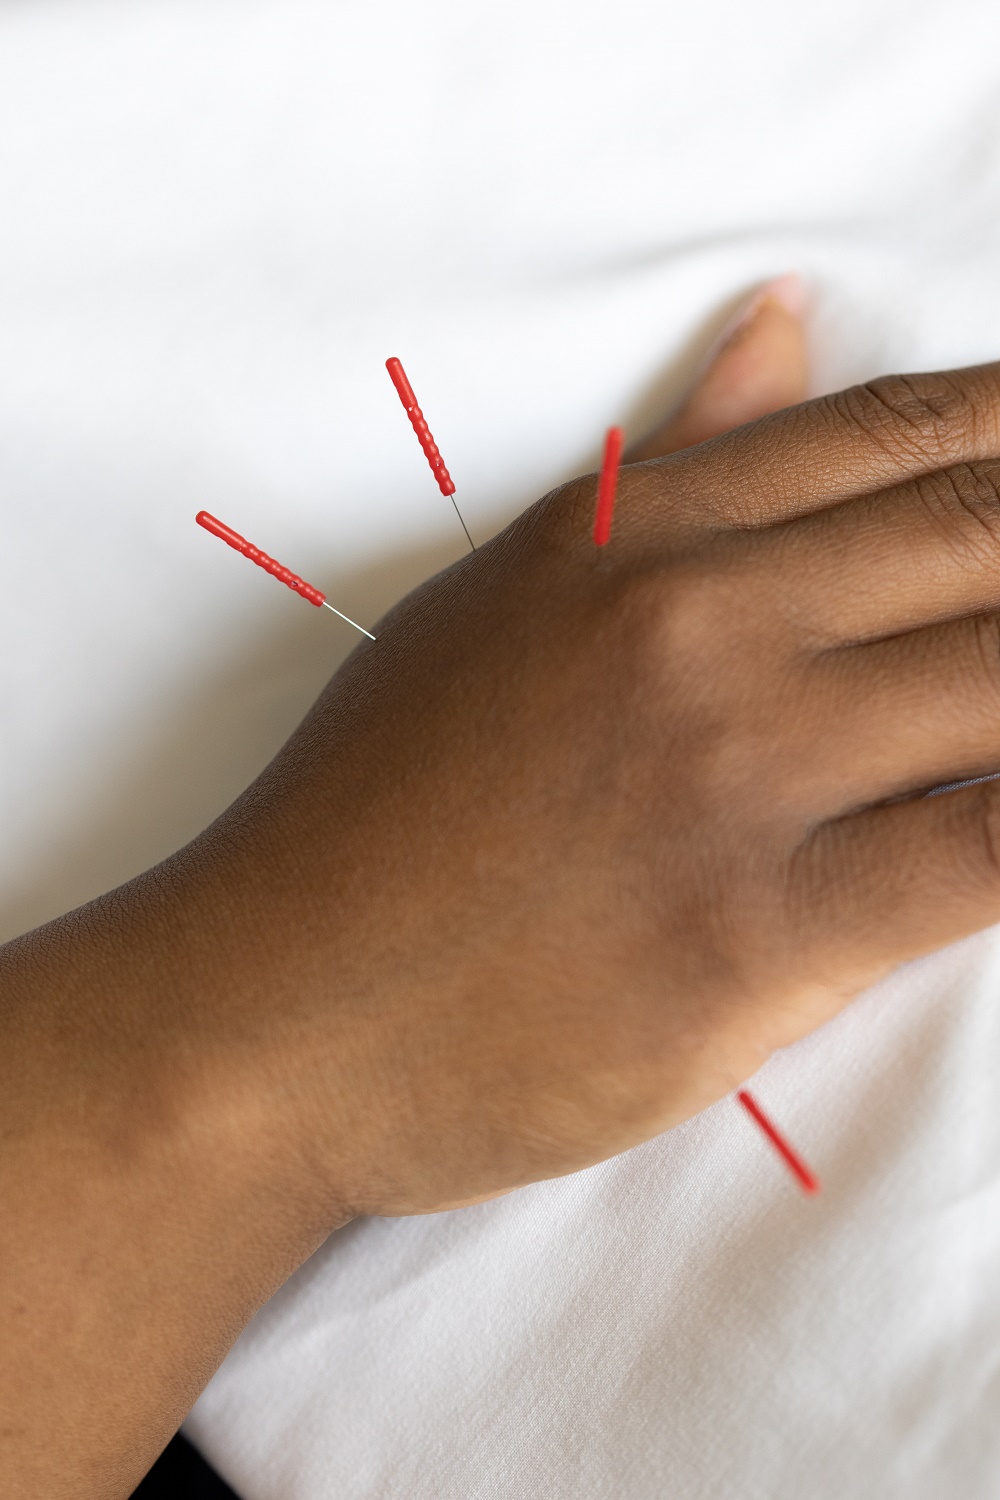 Acupuncture needles are inserted in someone's right hand in an example of local and distal acupuncture.